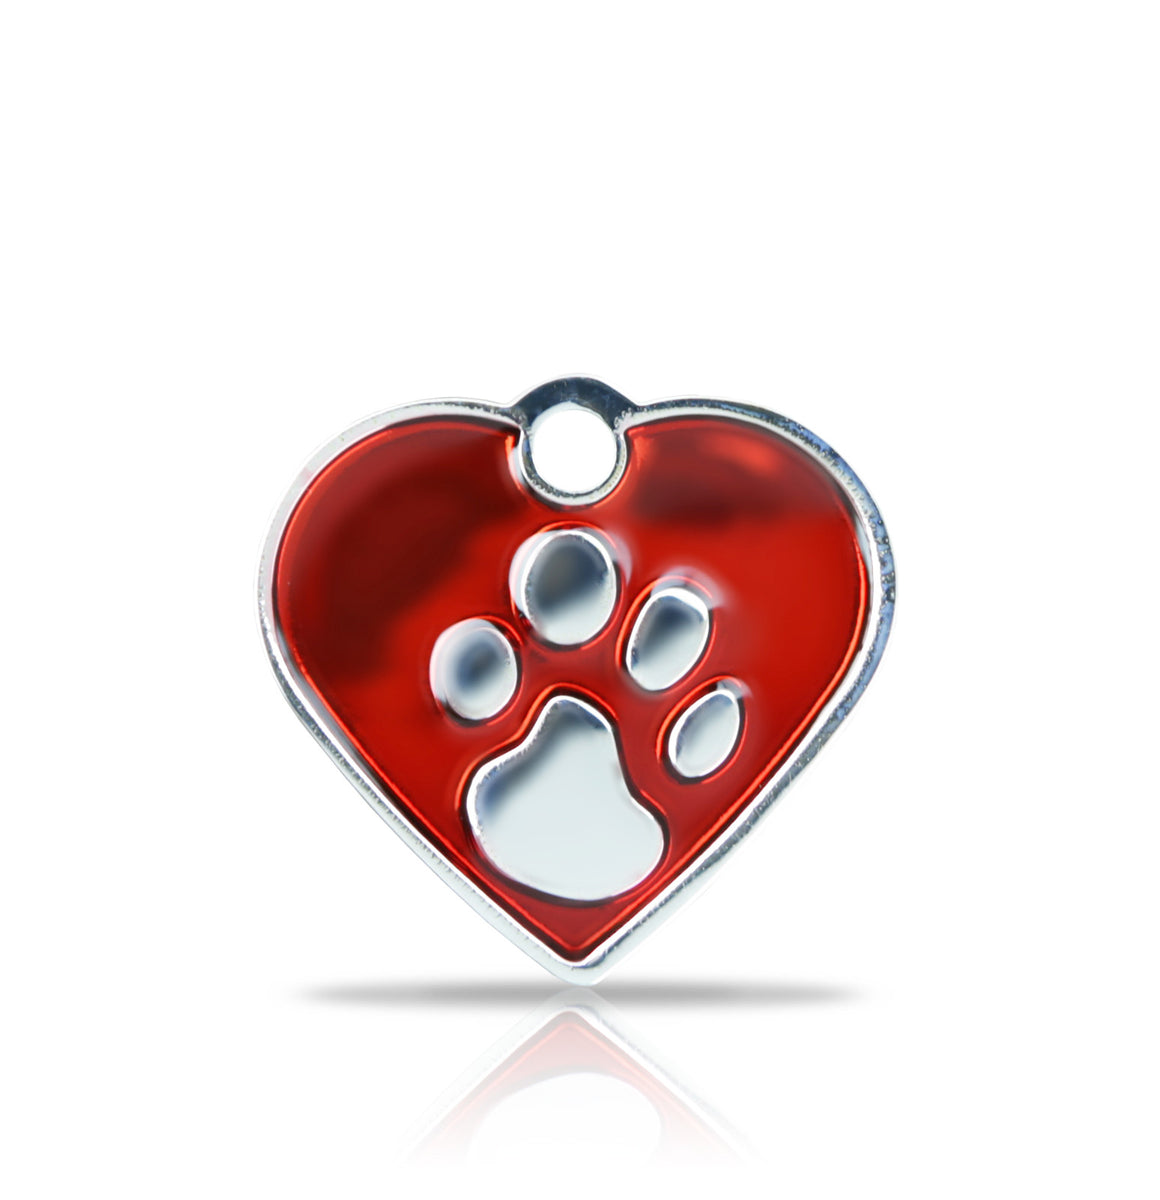 TaggIT Elegance Small Heart Red & Silver Paw Print Tag